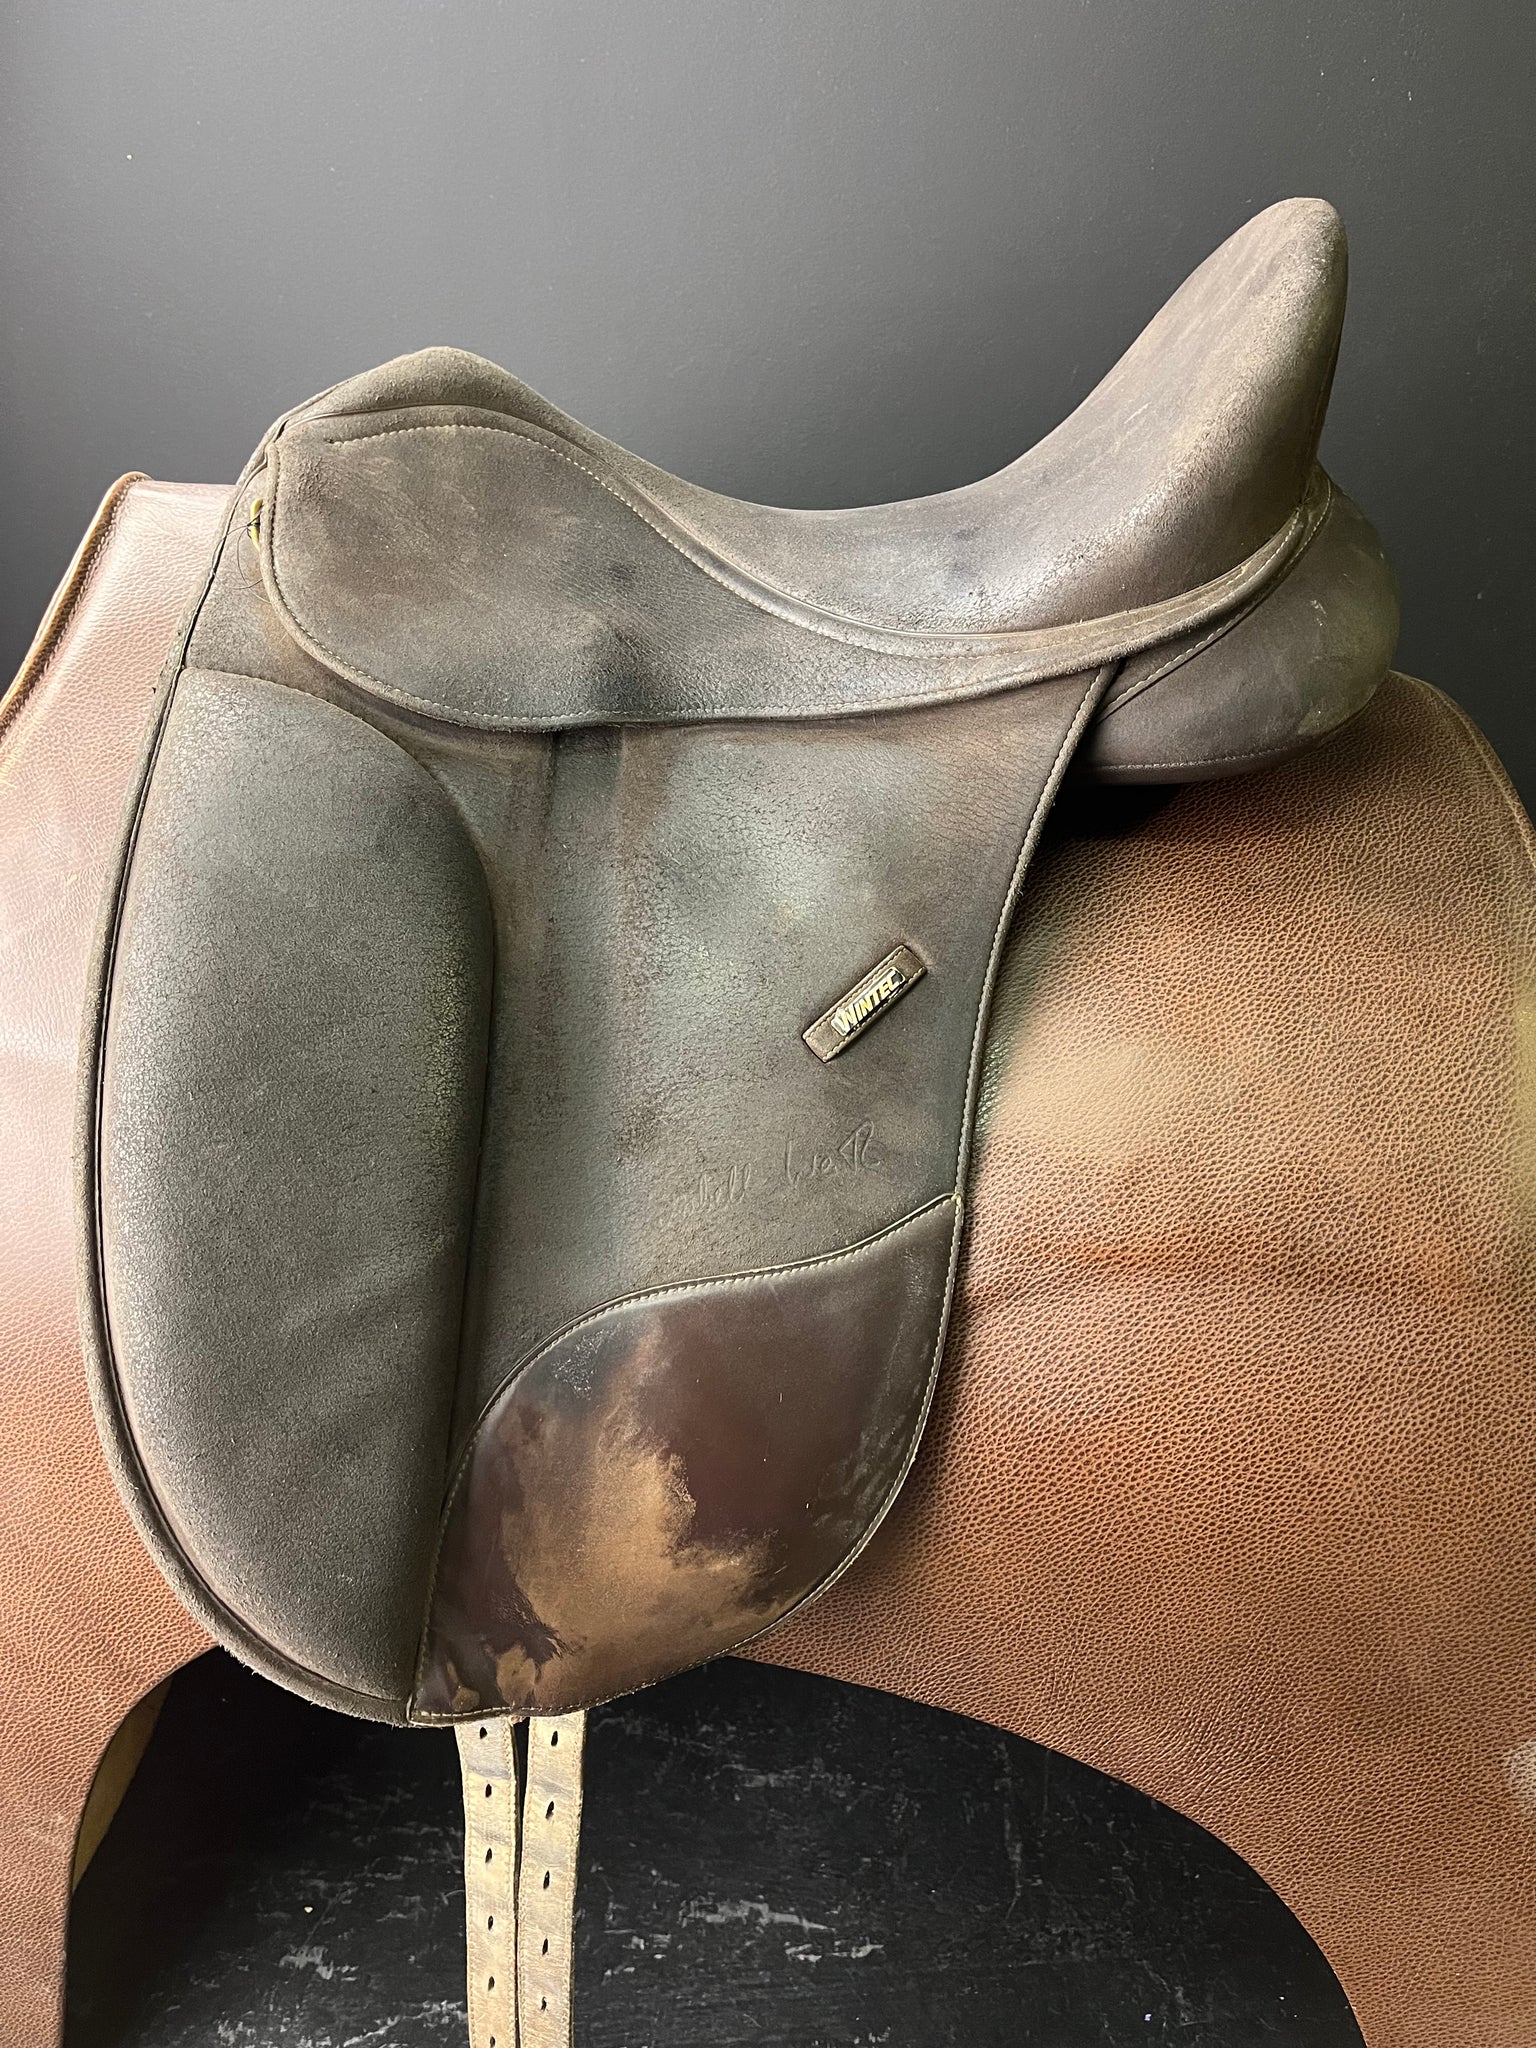 Wintec Isabell Werth Dressage Saddle 16.5" ID:2054D